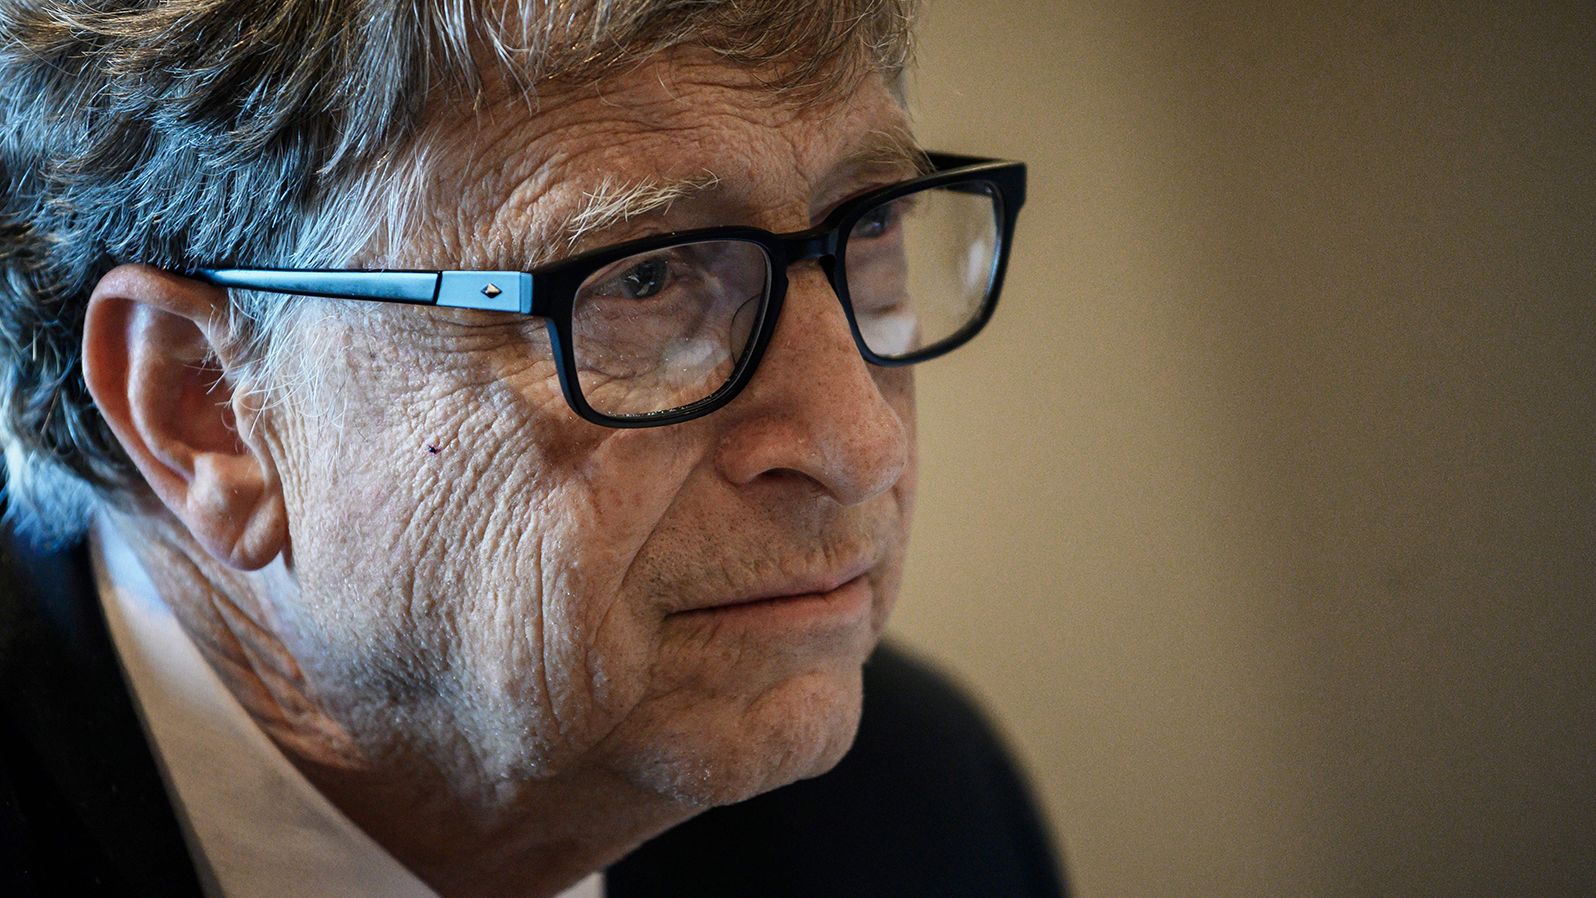 The Gates Foundation has pledged to commit $7 billion to Africa over the next four years